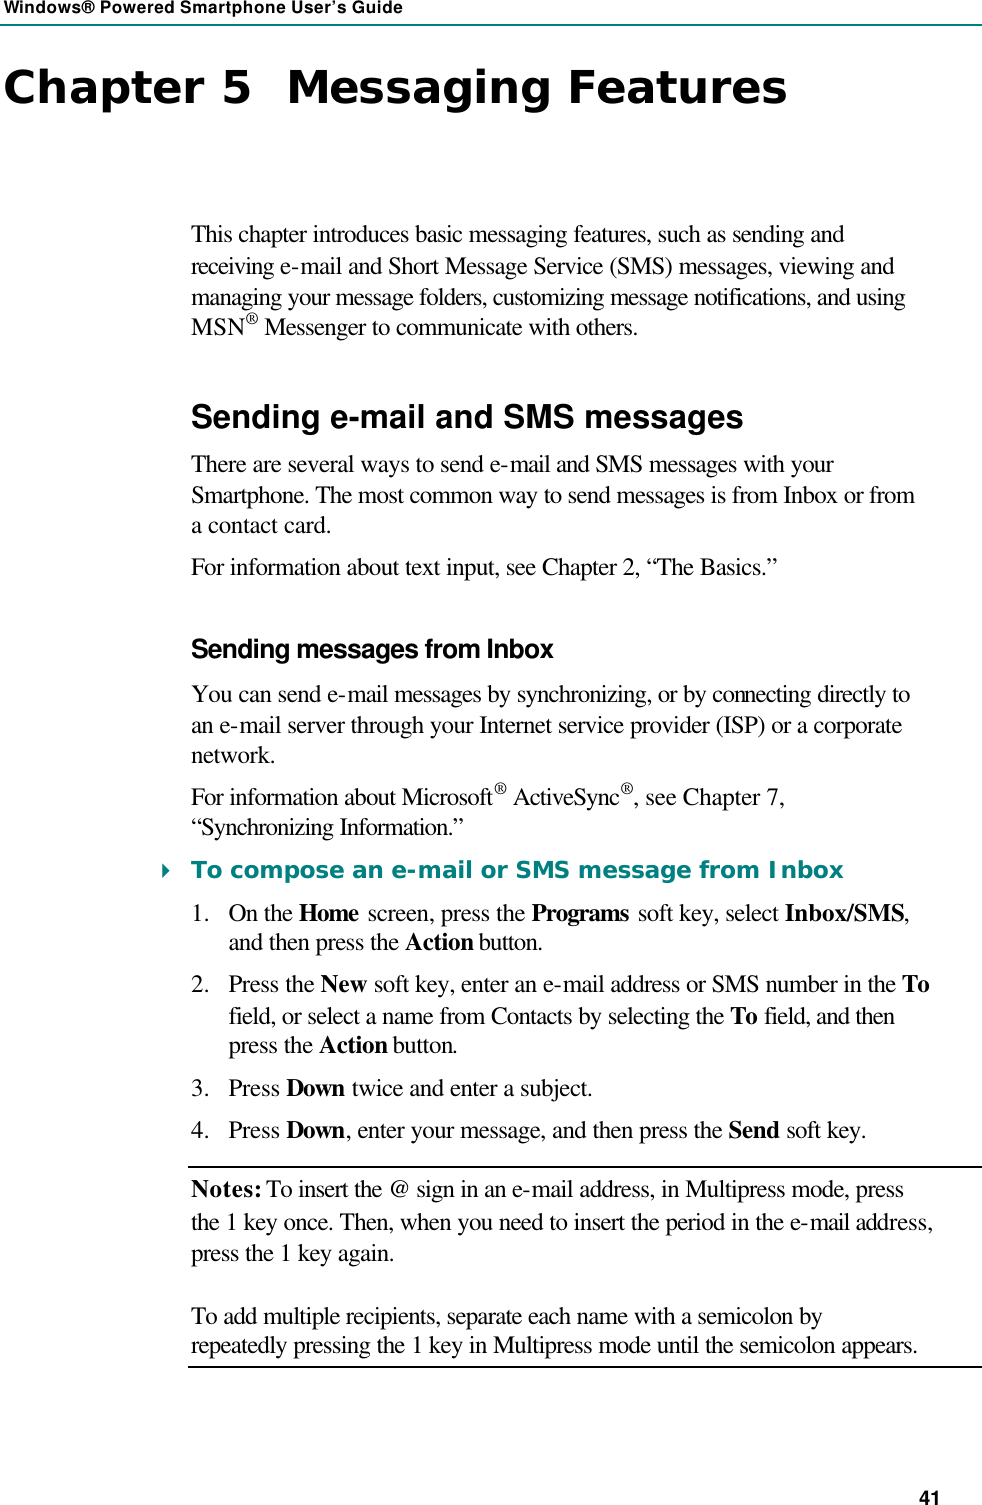 Windows® Powered Smartphone User’s Guide 41 Chapter 5  Messaging Features This chapter introduces basic messaging features, such as sending and receiving e-mail and Short Message Service (SMS) messages, viewing and managing your message folders, customizing message notifications, and using MSN® Messenger to communicate with others. Sending e-mail and SMS messages There are several ways to send e-mail and SMS messages with your Smartphone. The most common way to send messages is from Inbox or from a contact card. For information about text input, see Chapter 2, “The Basics.” Sending messages from Inbox You can send e-mail messages by synchronizing, or by connecting directly to an e-mail server through your Internet service provider (ISP) or a corporate network. For information about Microsoft® ActiveSync®, see Chapter 7, “Synchronizing Information.” 4 To compose an e-mail or SMS message from Inbox 1.  On the Home screen, press the Programs soft key, select Inbox/SMS, and then press the Action button. 2.  Press the New  soft key, enter an e-mail address or SMS number in the To field, or select a name from Contacts by selecting the To field, and then press the Action button. 3.  Press Down twice and enter a subject. 4.  Press Down, enter your message, and then press the Send soft key. Notes: To insert the @ sign in an e-mail address, in Multipress mode, press the 1 key once. Then, when you need to insert the period in the e-mail address, press the 1 key again. To add multiple recipients, separate each name with a semicolon by repeatedly pressing the 1 key in Multipress mode until the semicolon appears. 